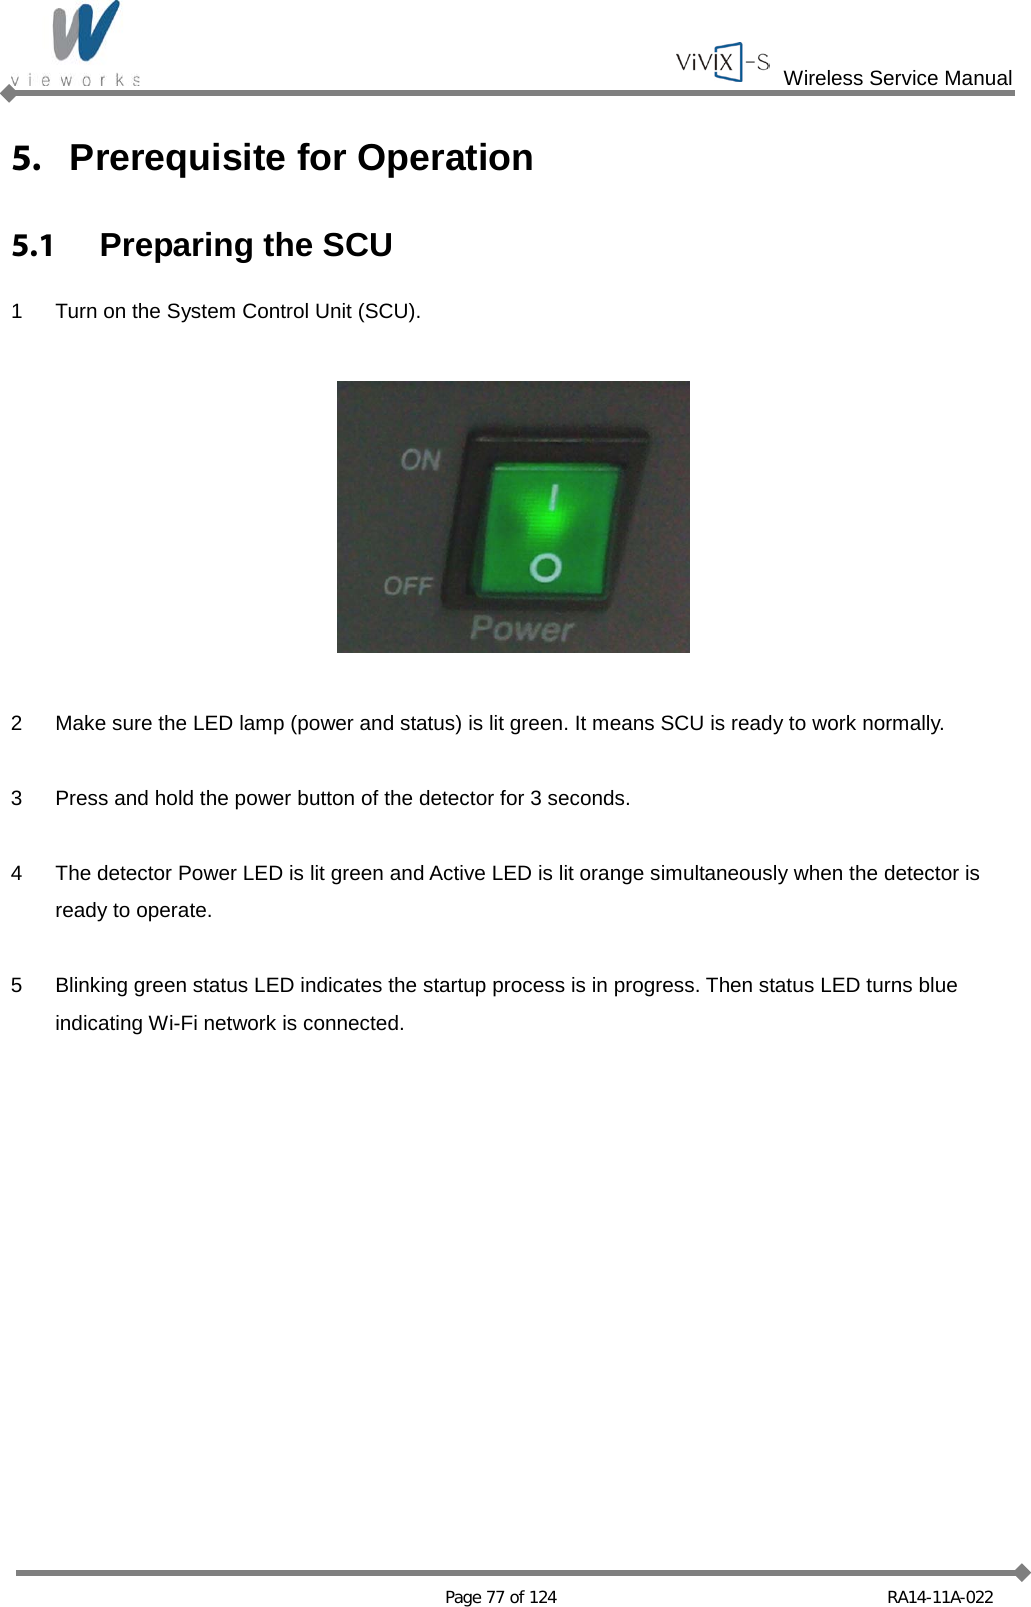  Wireless Service Manual   Page 77 of 124 RA14-11A-022 5. Prerequisite for Operation 5.1  Preparing the SCU 1  Turn on the System Control Unit (SCU).    2  Make sure the LED lamp (power and status) is lit green. It means SCU is ready to work normally.  3  Press and hold the power button of the detector for 3 seconds.  4  The detector Power LED is lit green and Active LED is lit orange simultaneously when the detector is ready to operate.  5  Blinking green status LED indicates the startup process is in progress. Then status LED turns blue indicating Wi-Fi network is connected.  